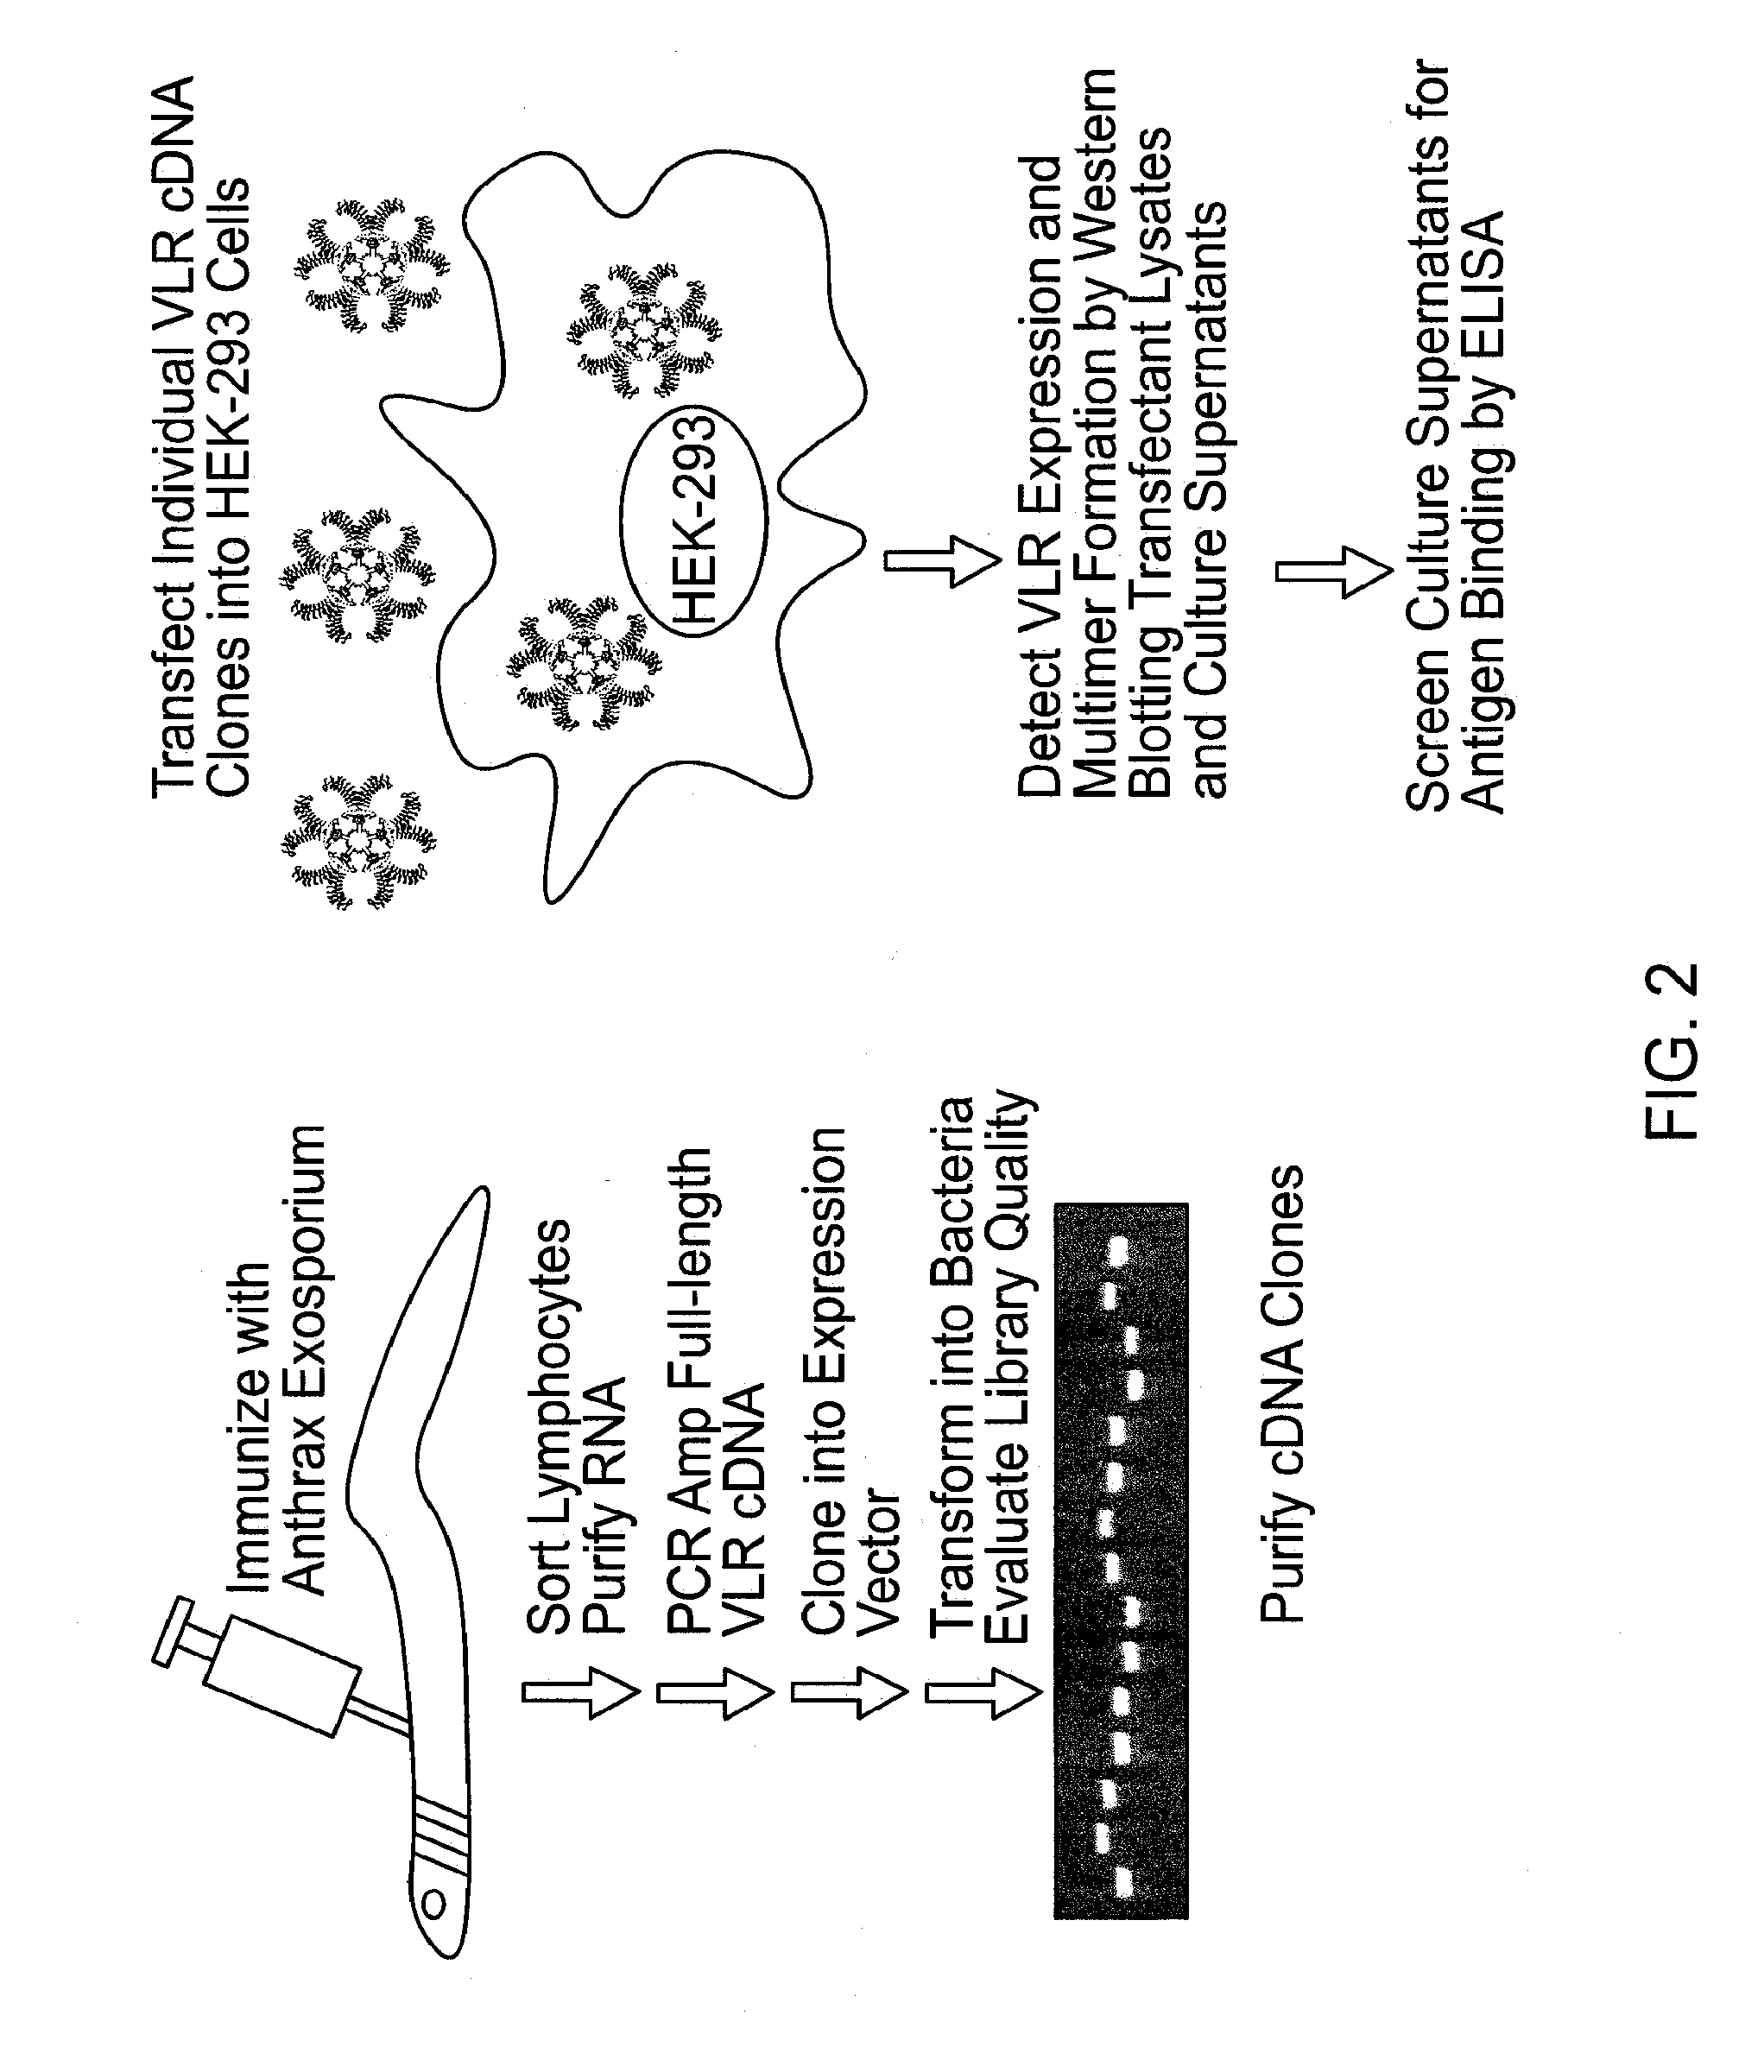 Methods and compositions related to soluble monoclonal variable lymphocyte receptors of defined antigen specificity